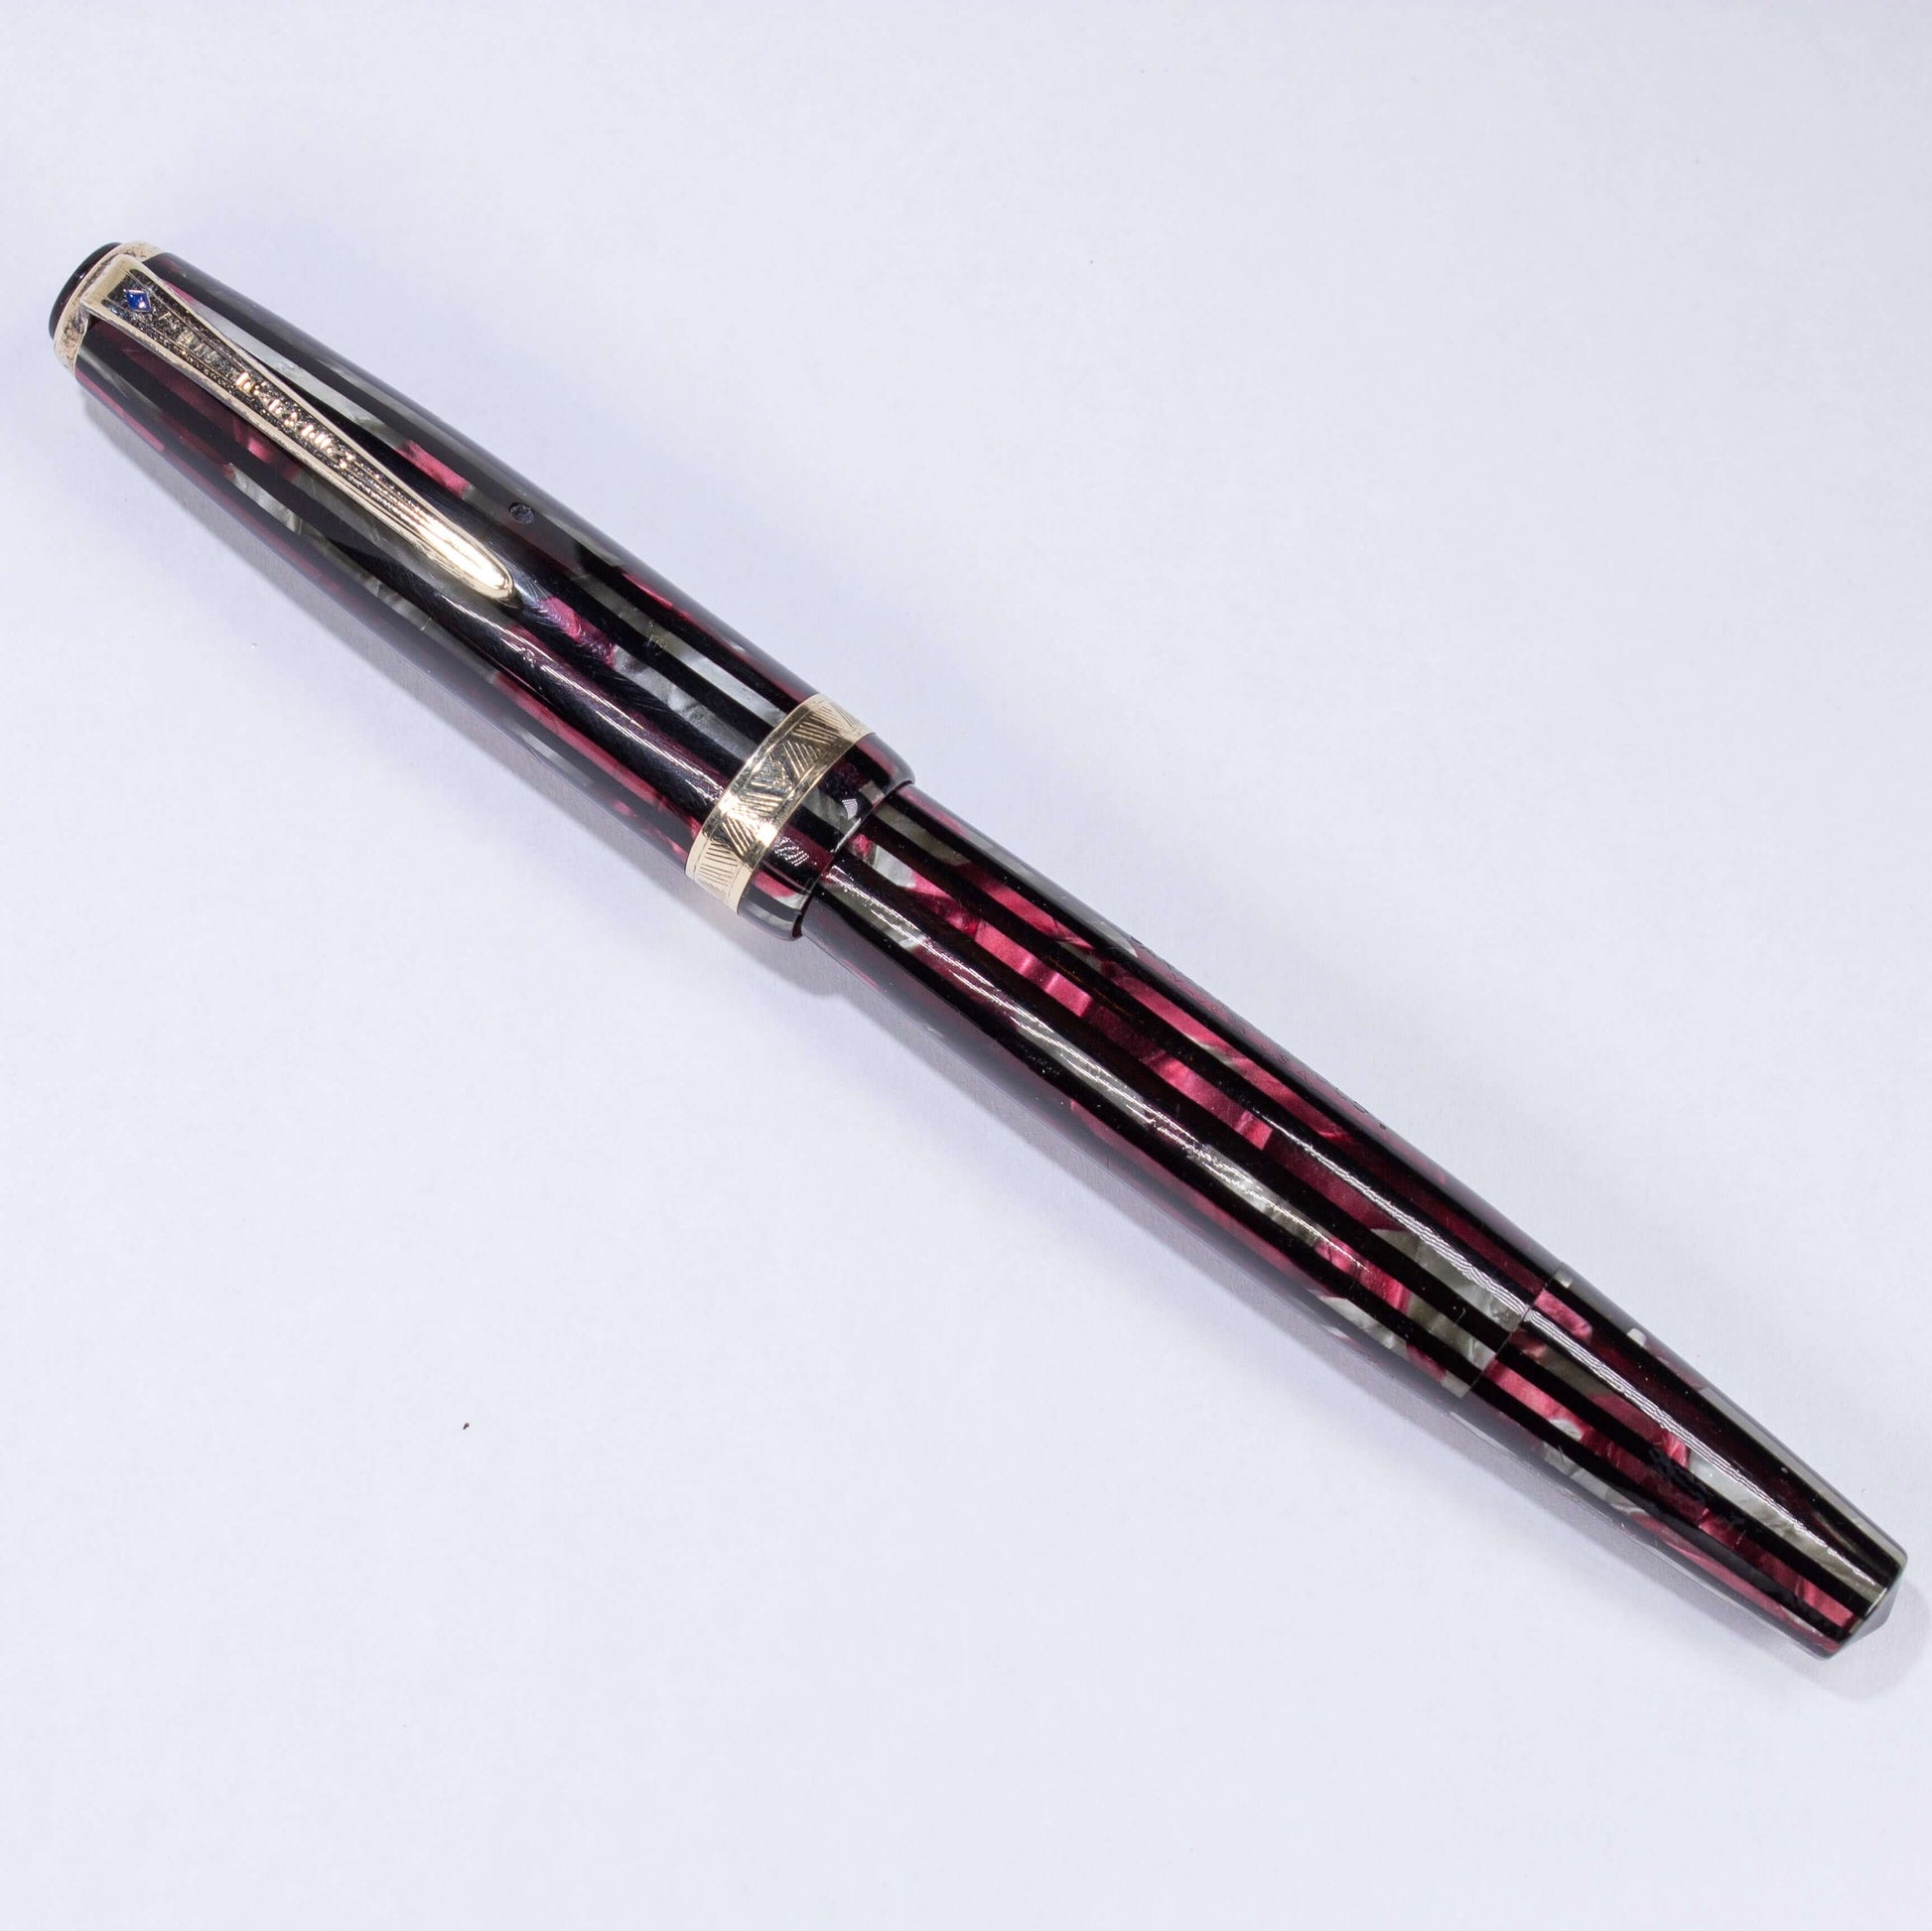 Parker Striped Duofold- Duovac, 14K "V" Nib, Dusty Red, Restored Vintage Fountain PenName/Type: Parker Duovac Manufacture Year: 1945 Length: 5 1/4 Filling System: Restored Vacumatic with plastic filler Color/Pattern: Dusty Red Nib Type/Condition and remar